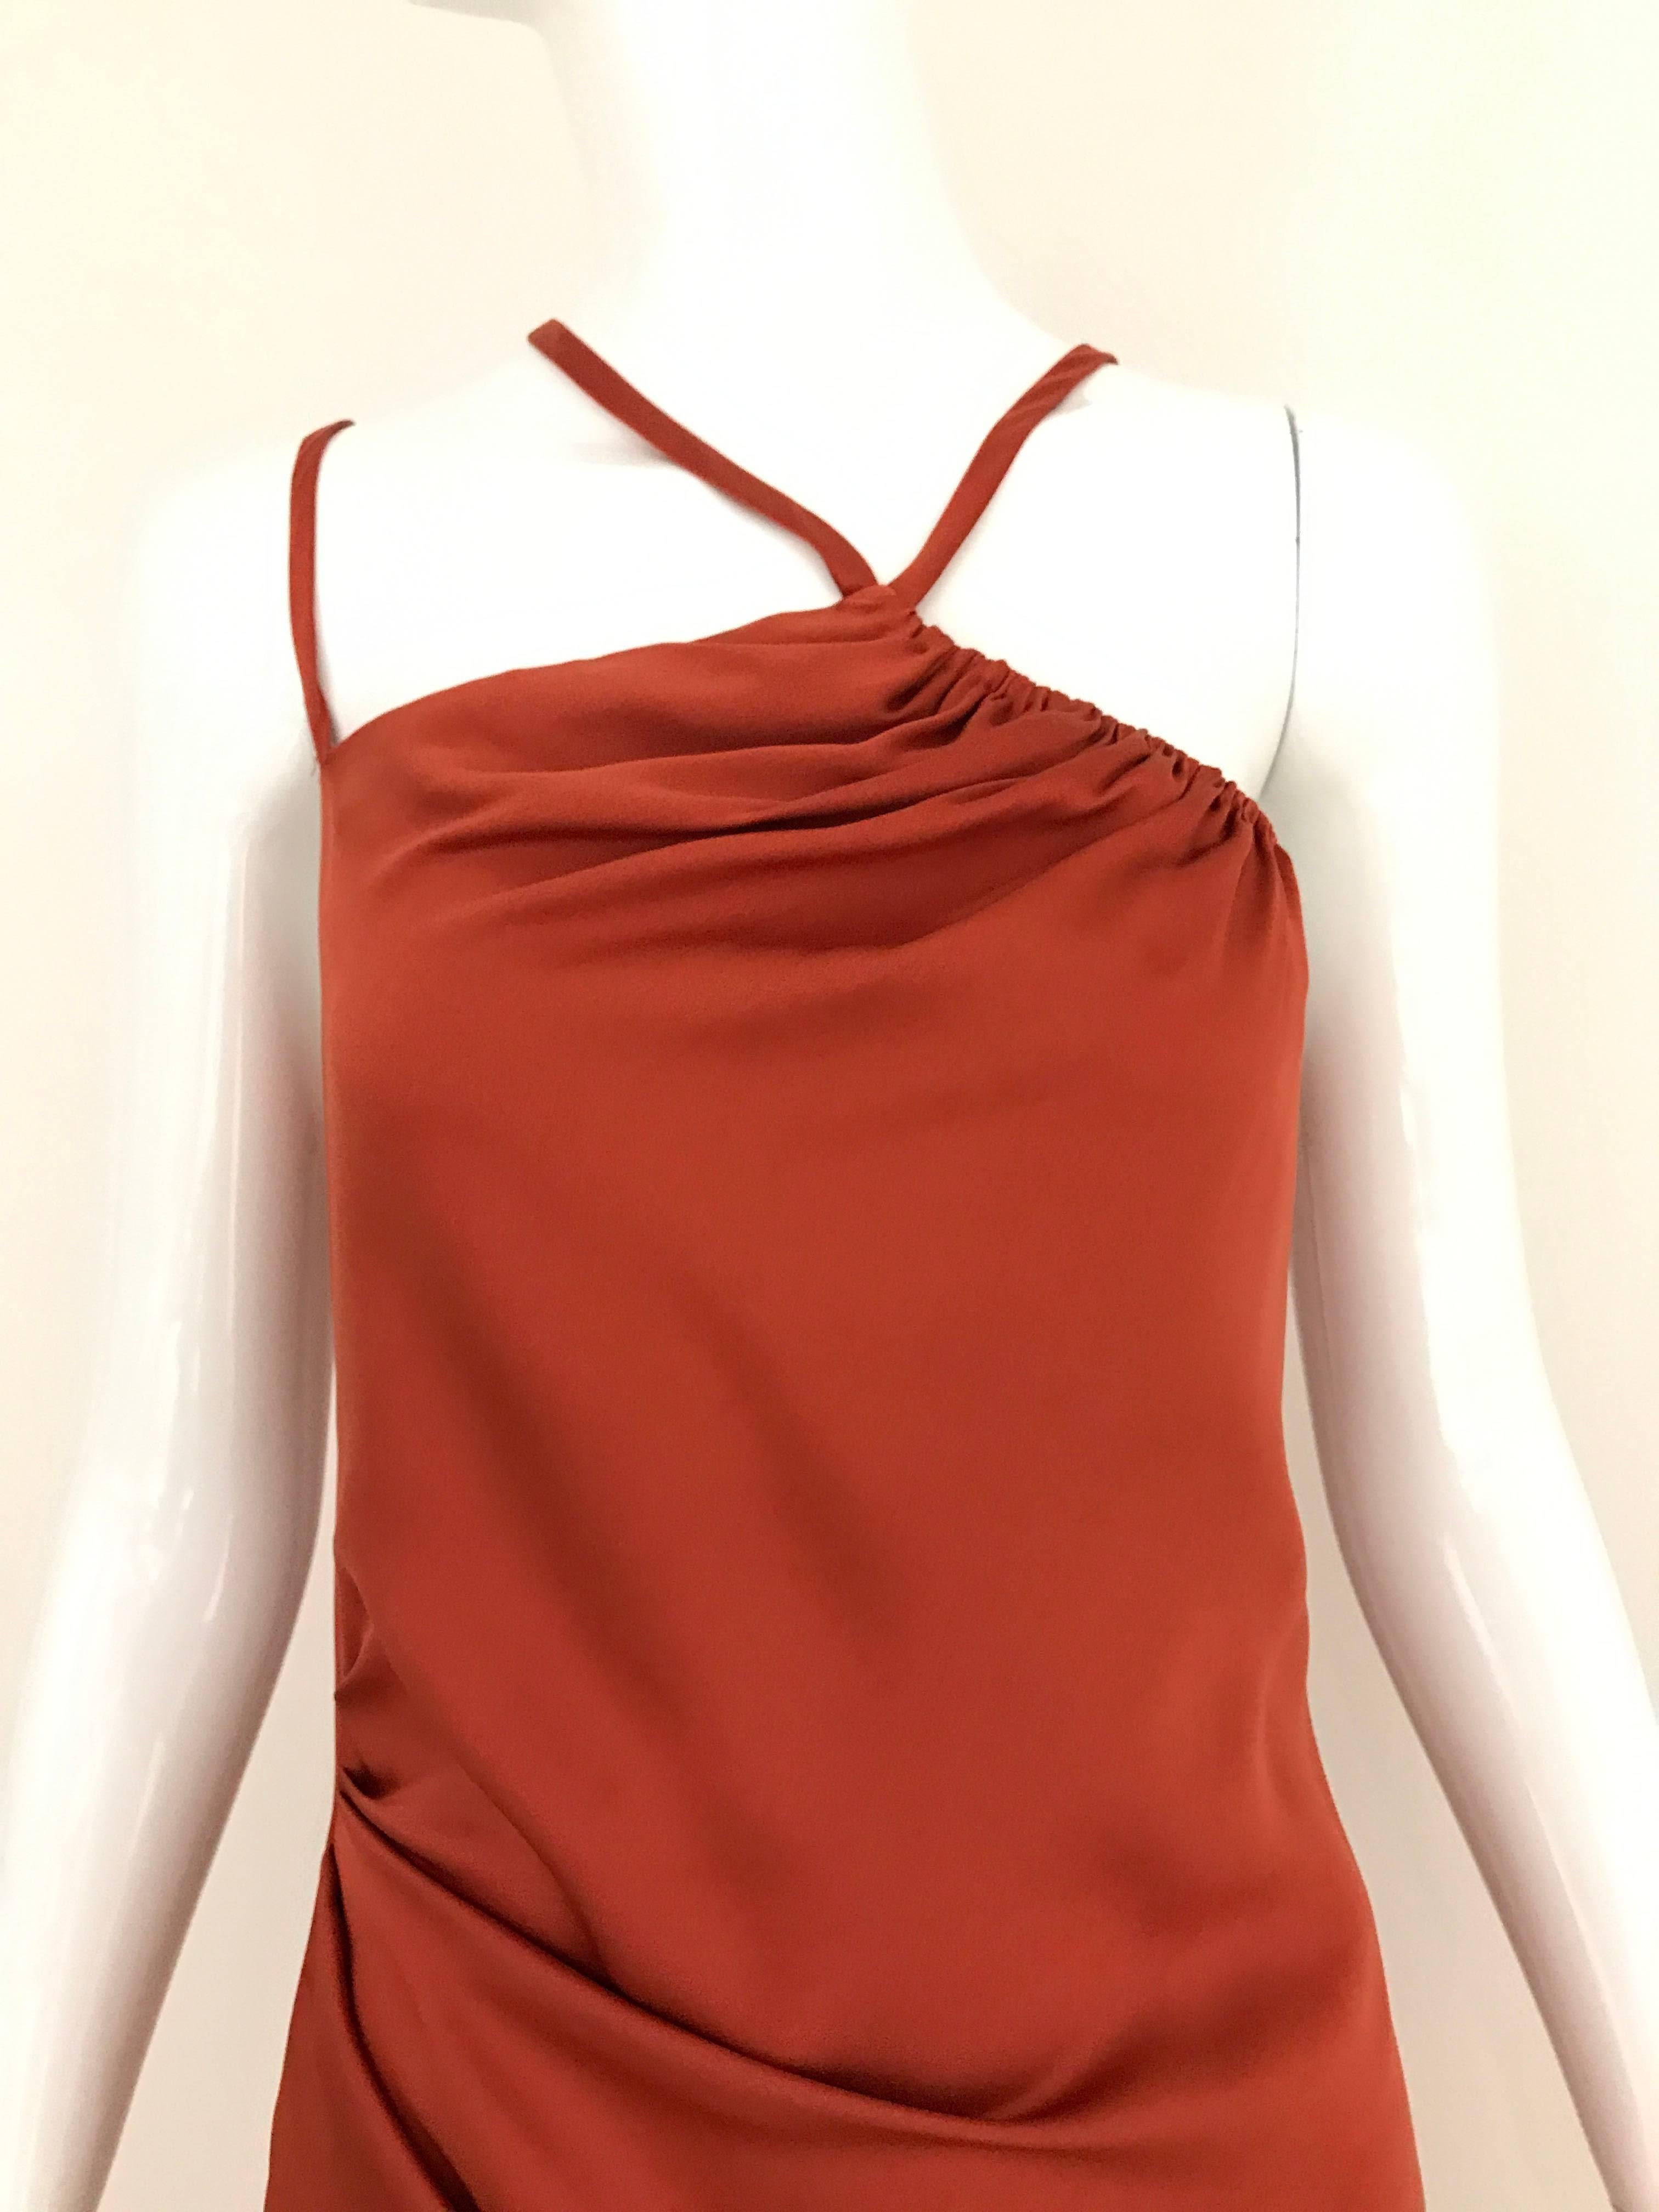 Vintage BILL BLASS Orange Burnt Silk Gown with asymmetrical shoulder strap.
zip at the back and slightly ruching on the waist. What an elegance gown.
Fit US - Medium
Bust: 38 inch / Waist: 32 inch / Hip 42 inch / Length: 62 inch

**** This Garment